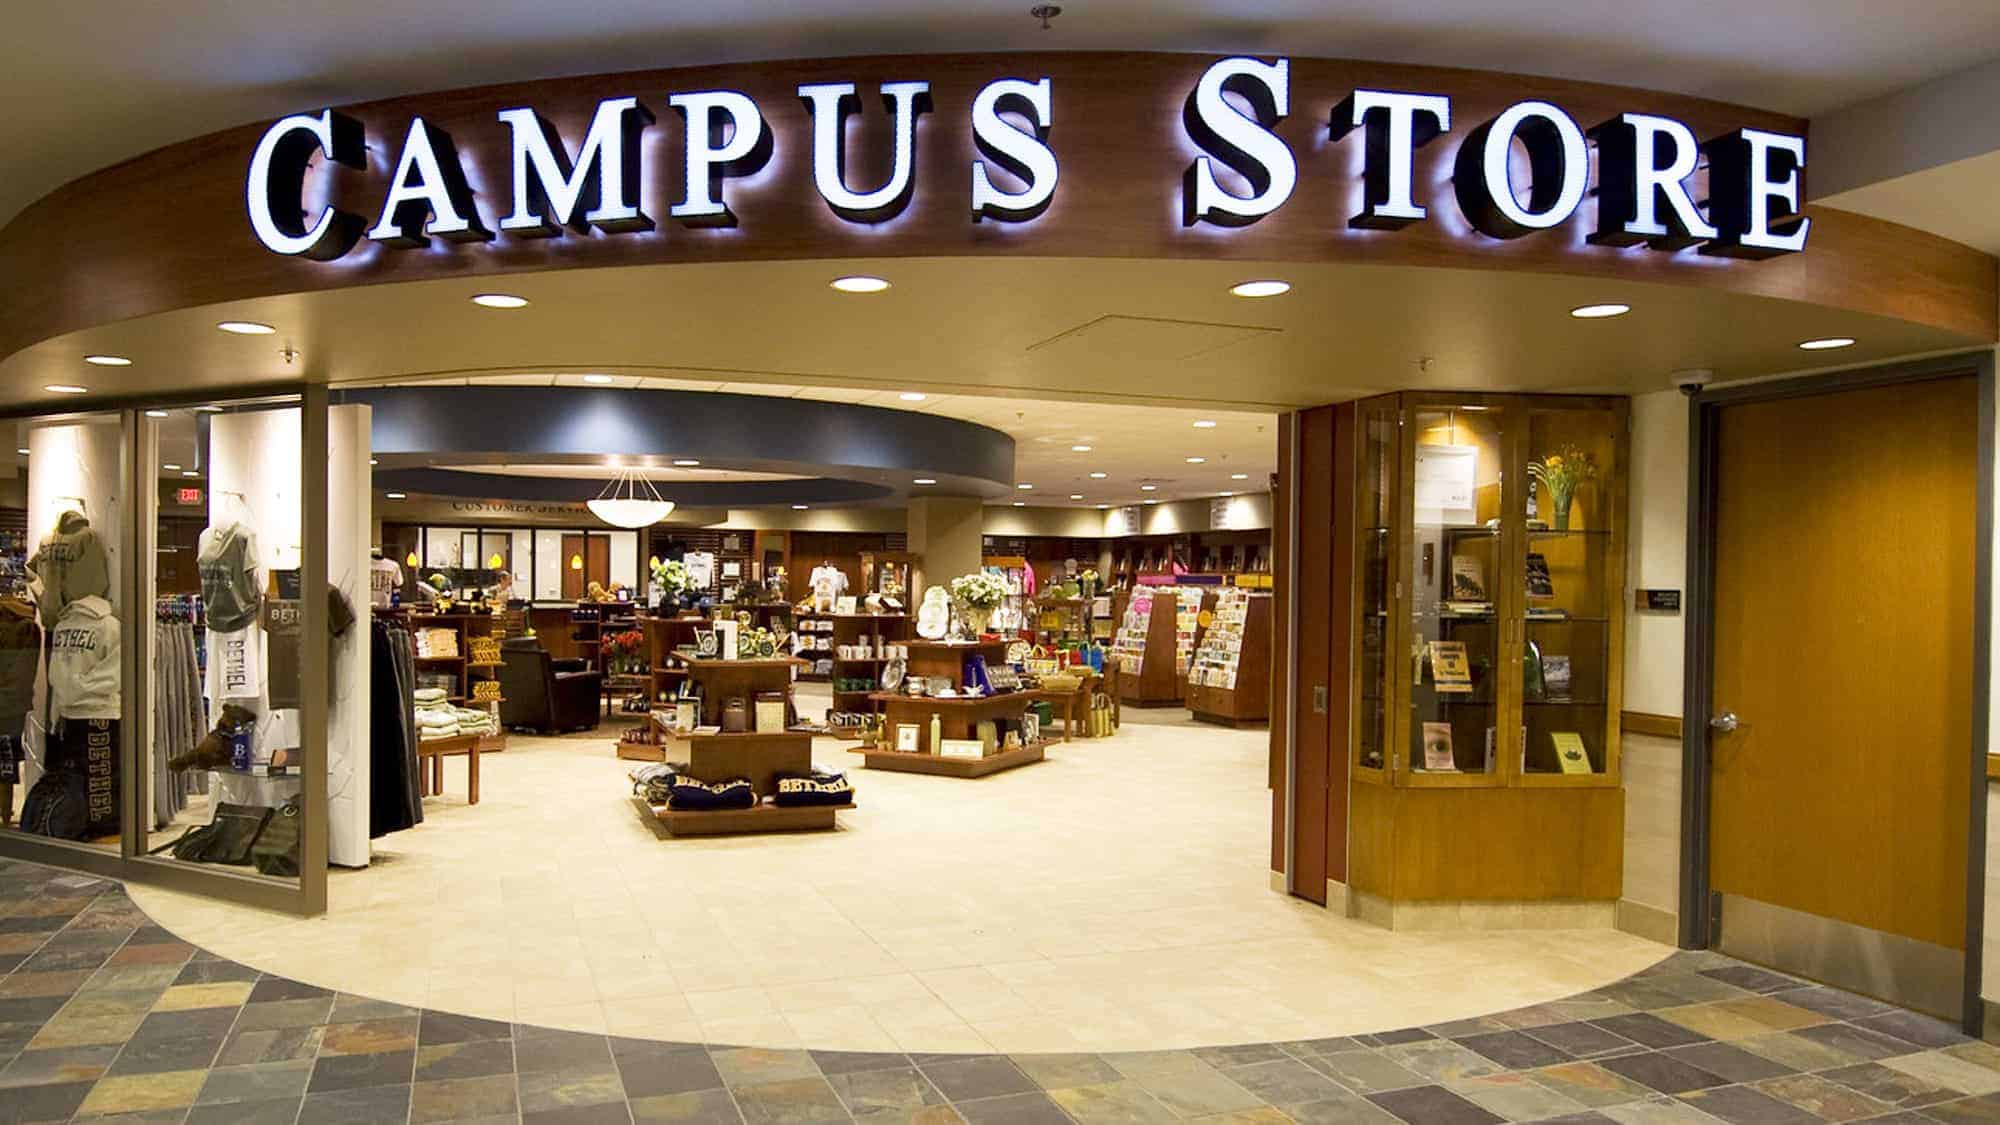 Student employment at campus bookstore means no FICA taxes on paycheck calculations